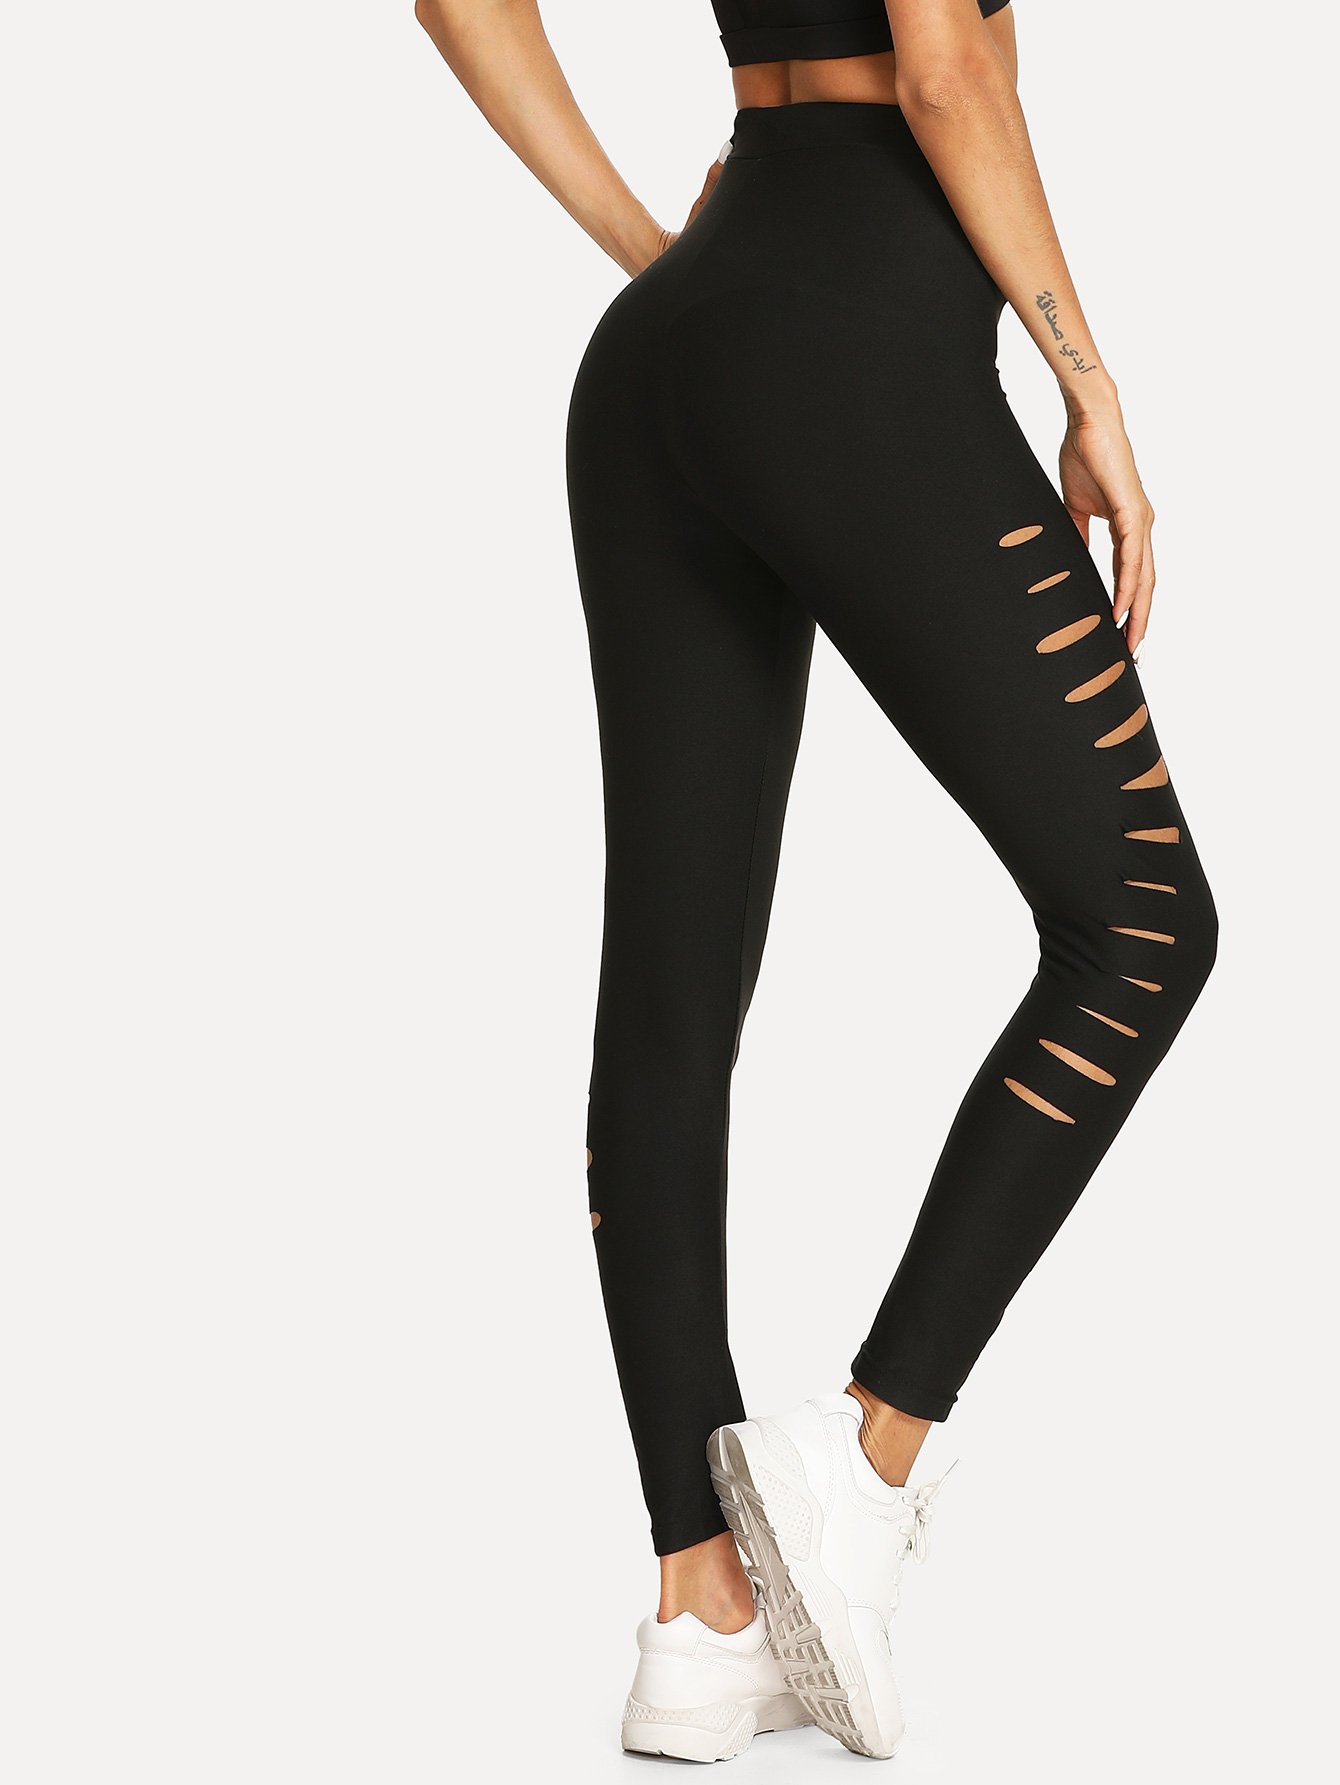 Sexy leggings have revolutionized the fashion landscape, offering unparalleled comfort and style for various occasions.